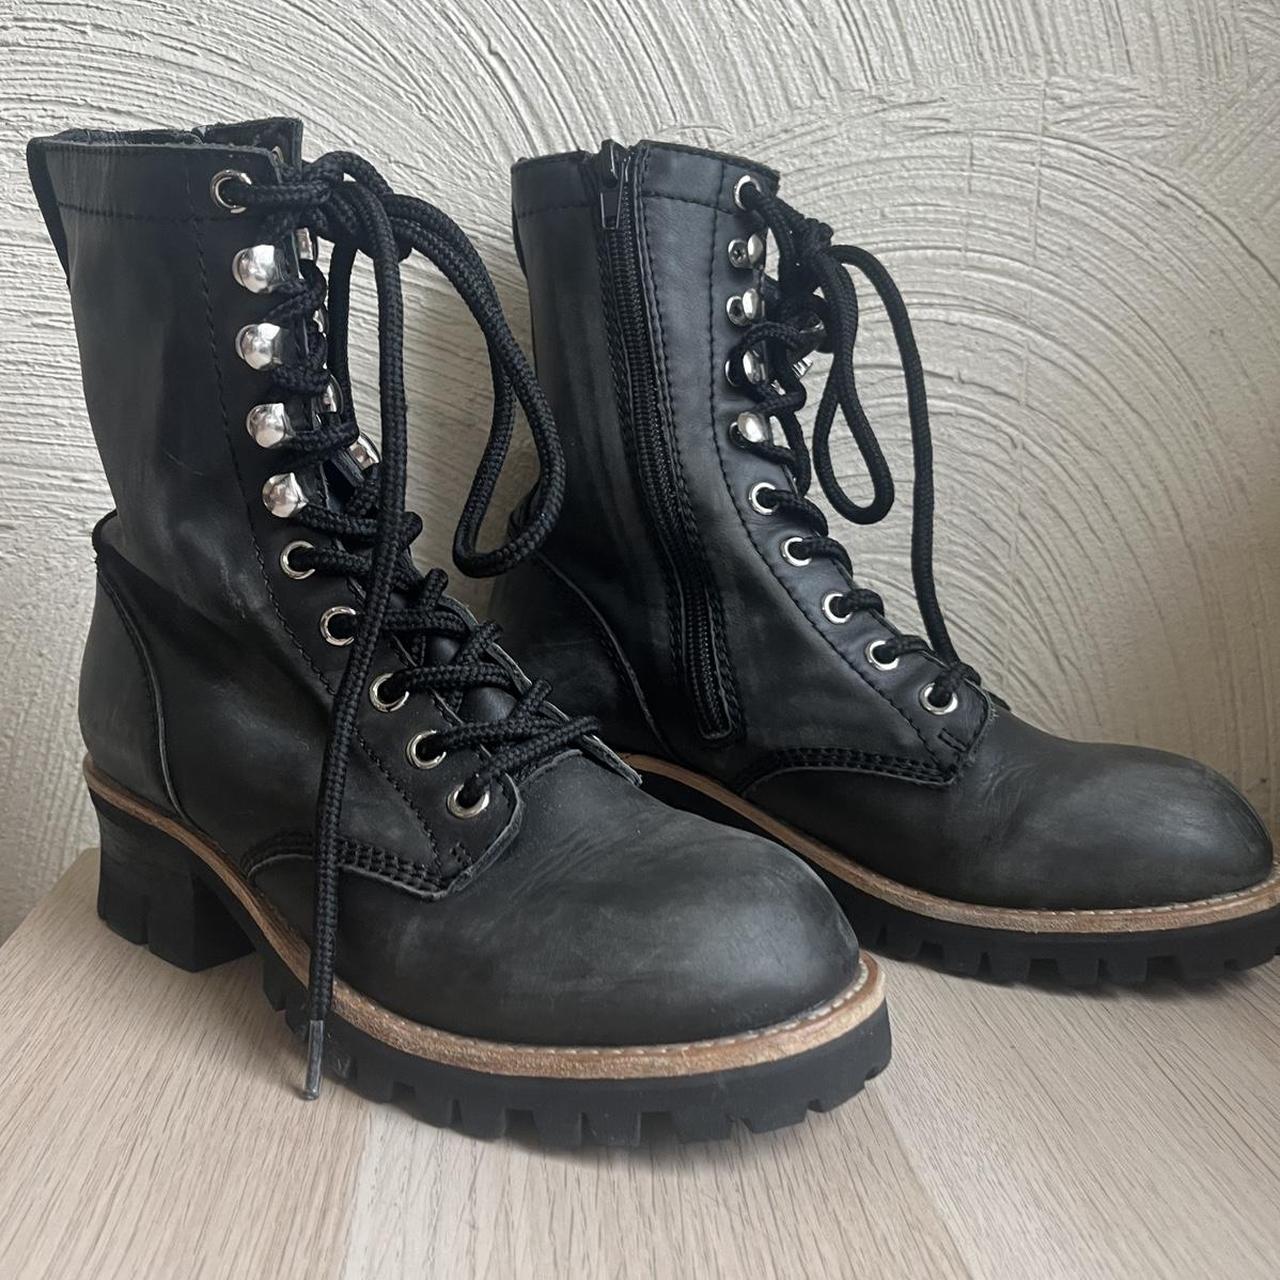 JEFFREY CAMPBELL x FREE PEOPLE lucca boots 6M... - Depop